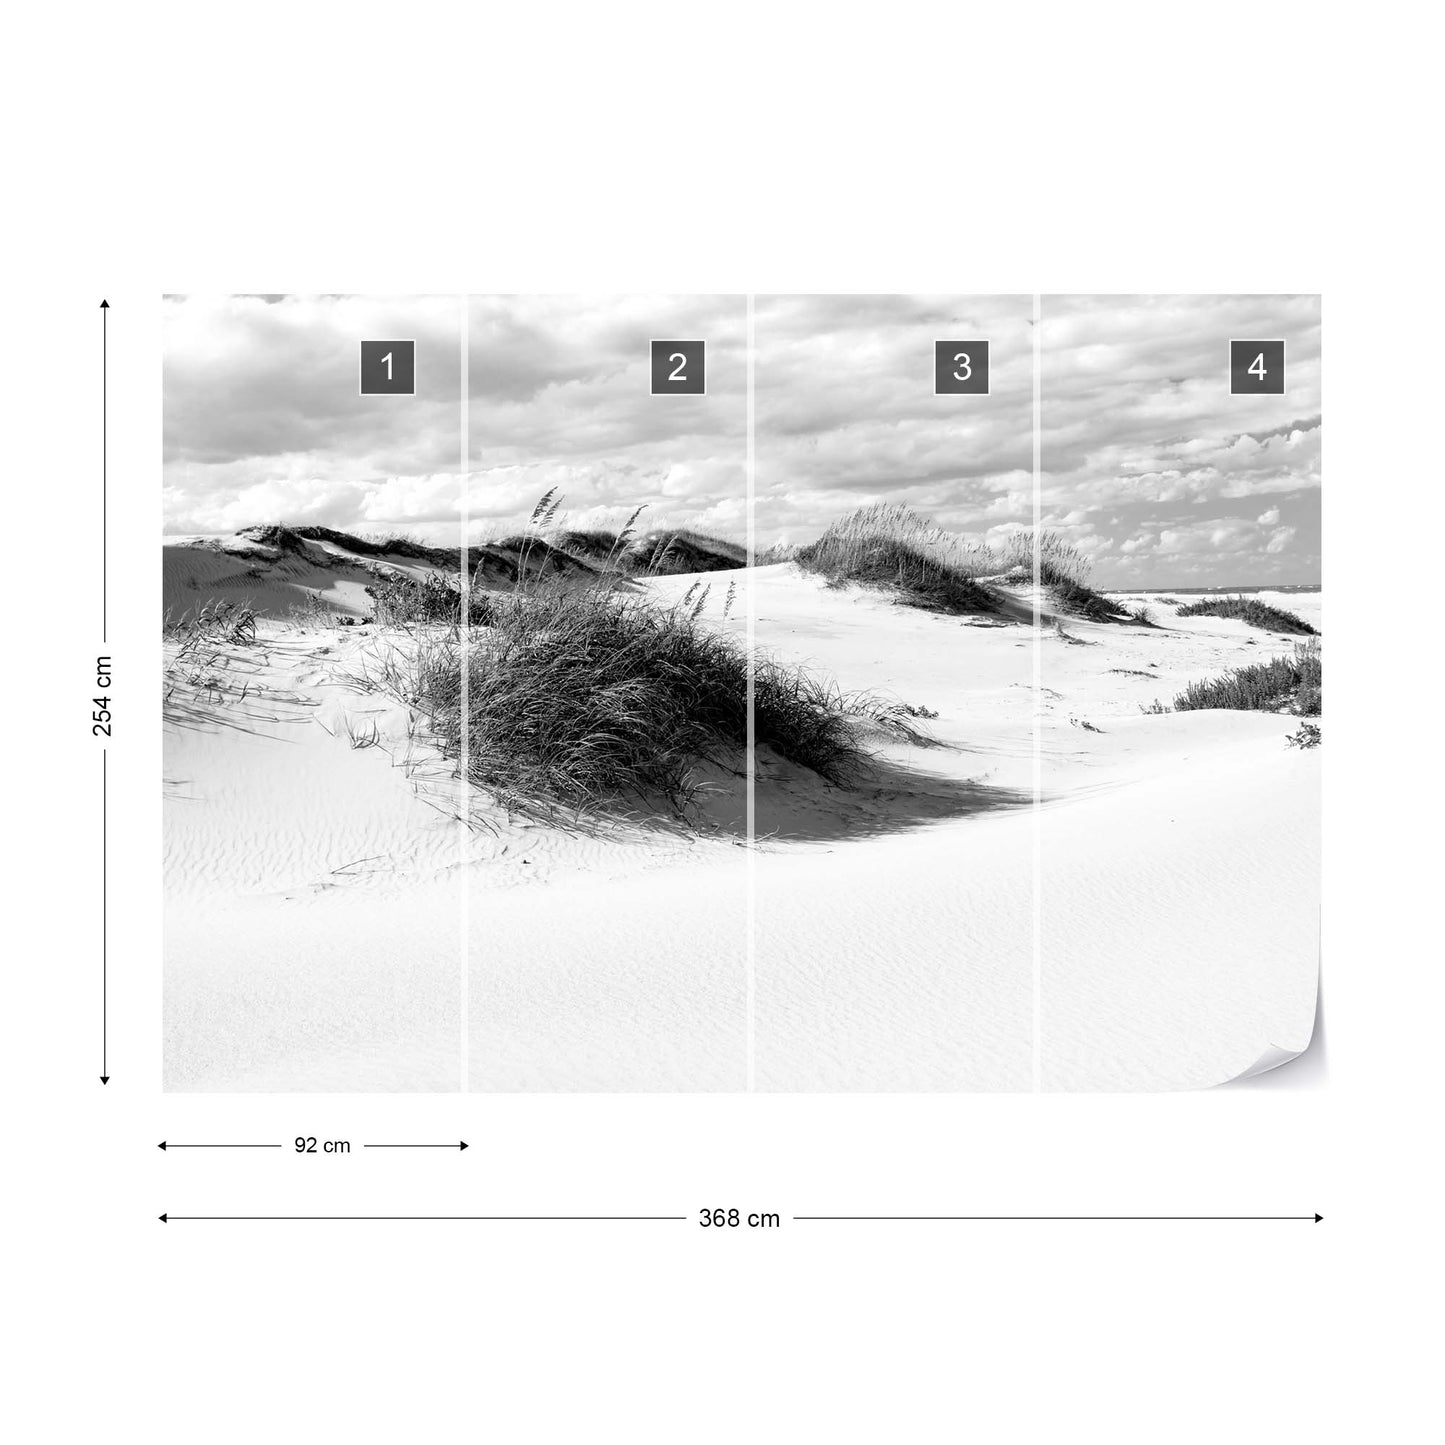 Afternoon in the Dunes Black and White Wallpaper - USTAD HOME